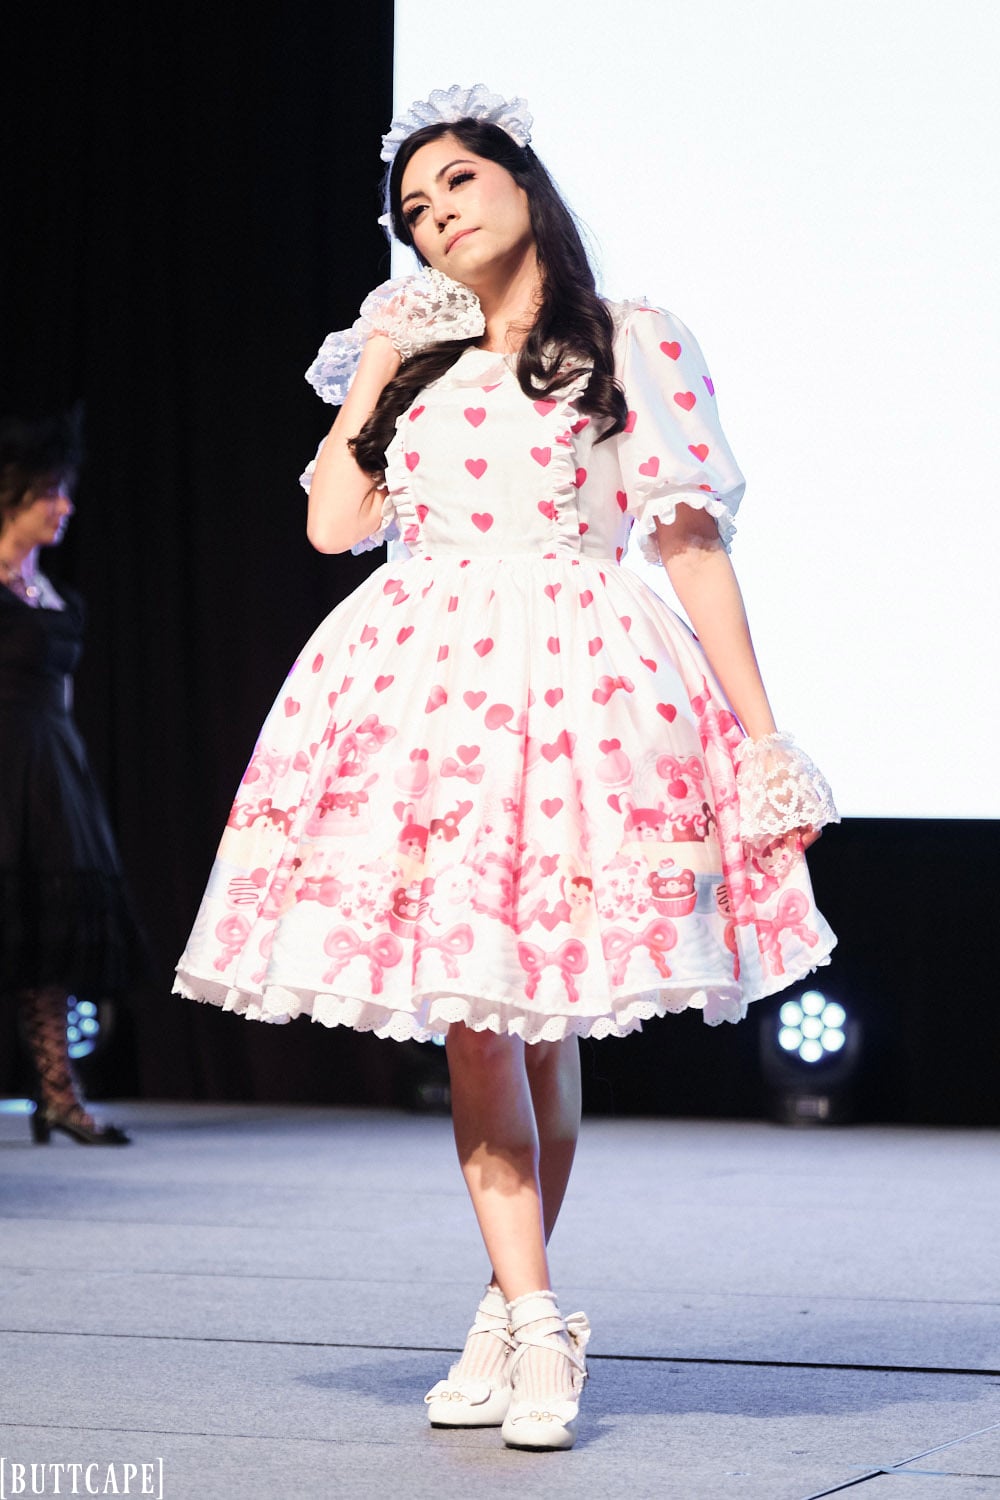 lolita model wearing white and pink dessert print dress posing with hand next to face and legs crossed.